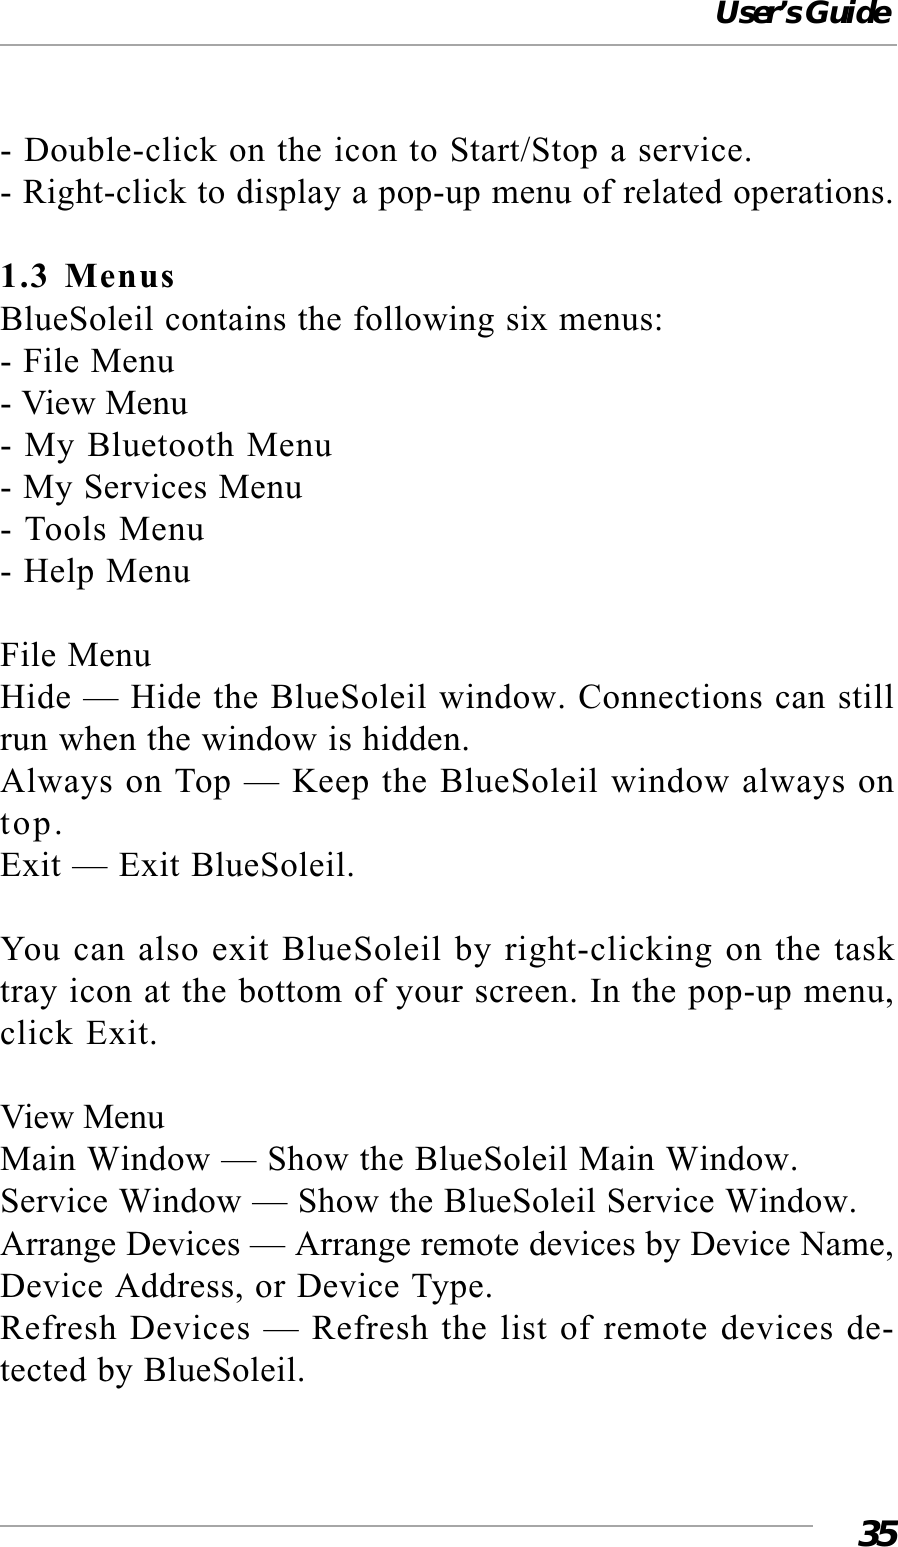 User’s Guide35- Double-click on the icon to Start/Stop a service.- Right-click to display a pop-up menu of related operations.1.3 MenusBlueSoleil contains the following six menus:- File Menu- View Menu- My Bluetooth Menu- My Services Menu- Tools Menu- Help MenuFile MenuHide — Hide the BlueSoleil window. Connections can stillrun when the window is hidden.Always on Top — Keep the BlueSoleil window always ontop.Exit — Exit BlueSoleil.You can also exit BlueSoleil by right-clicking on the tasktray icon at the bottom of your screen. In the pop-up menu,click Exit.View MenuMain Window — Show the BlueSoleil Main Window.Service Window — Show the BlueSoleil Service Window.Arrange Devices — Arrange remote devices by Device Name,Device Address, or Device Type.Refresh Devices — Refresh the list of remote devices de-tected by BlueSoleil.